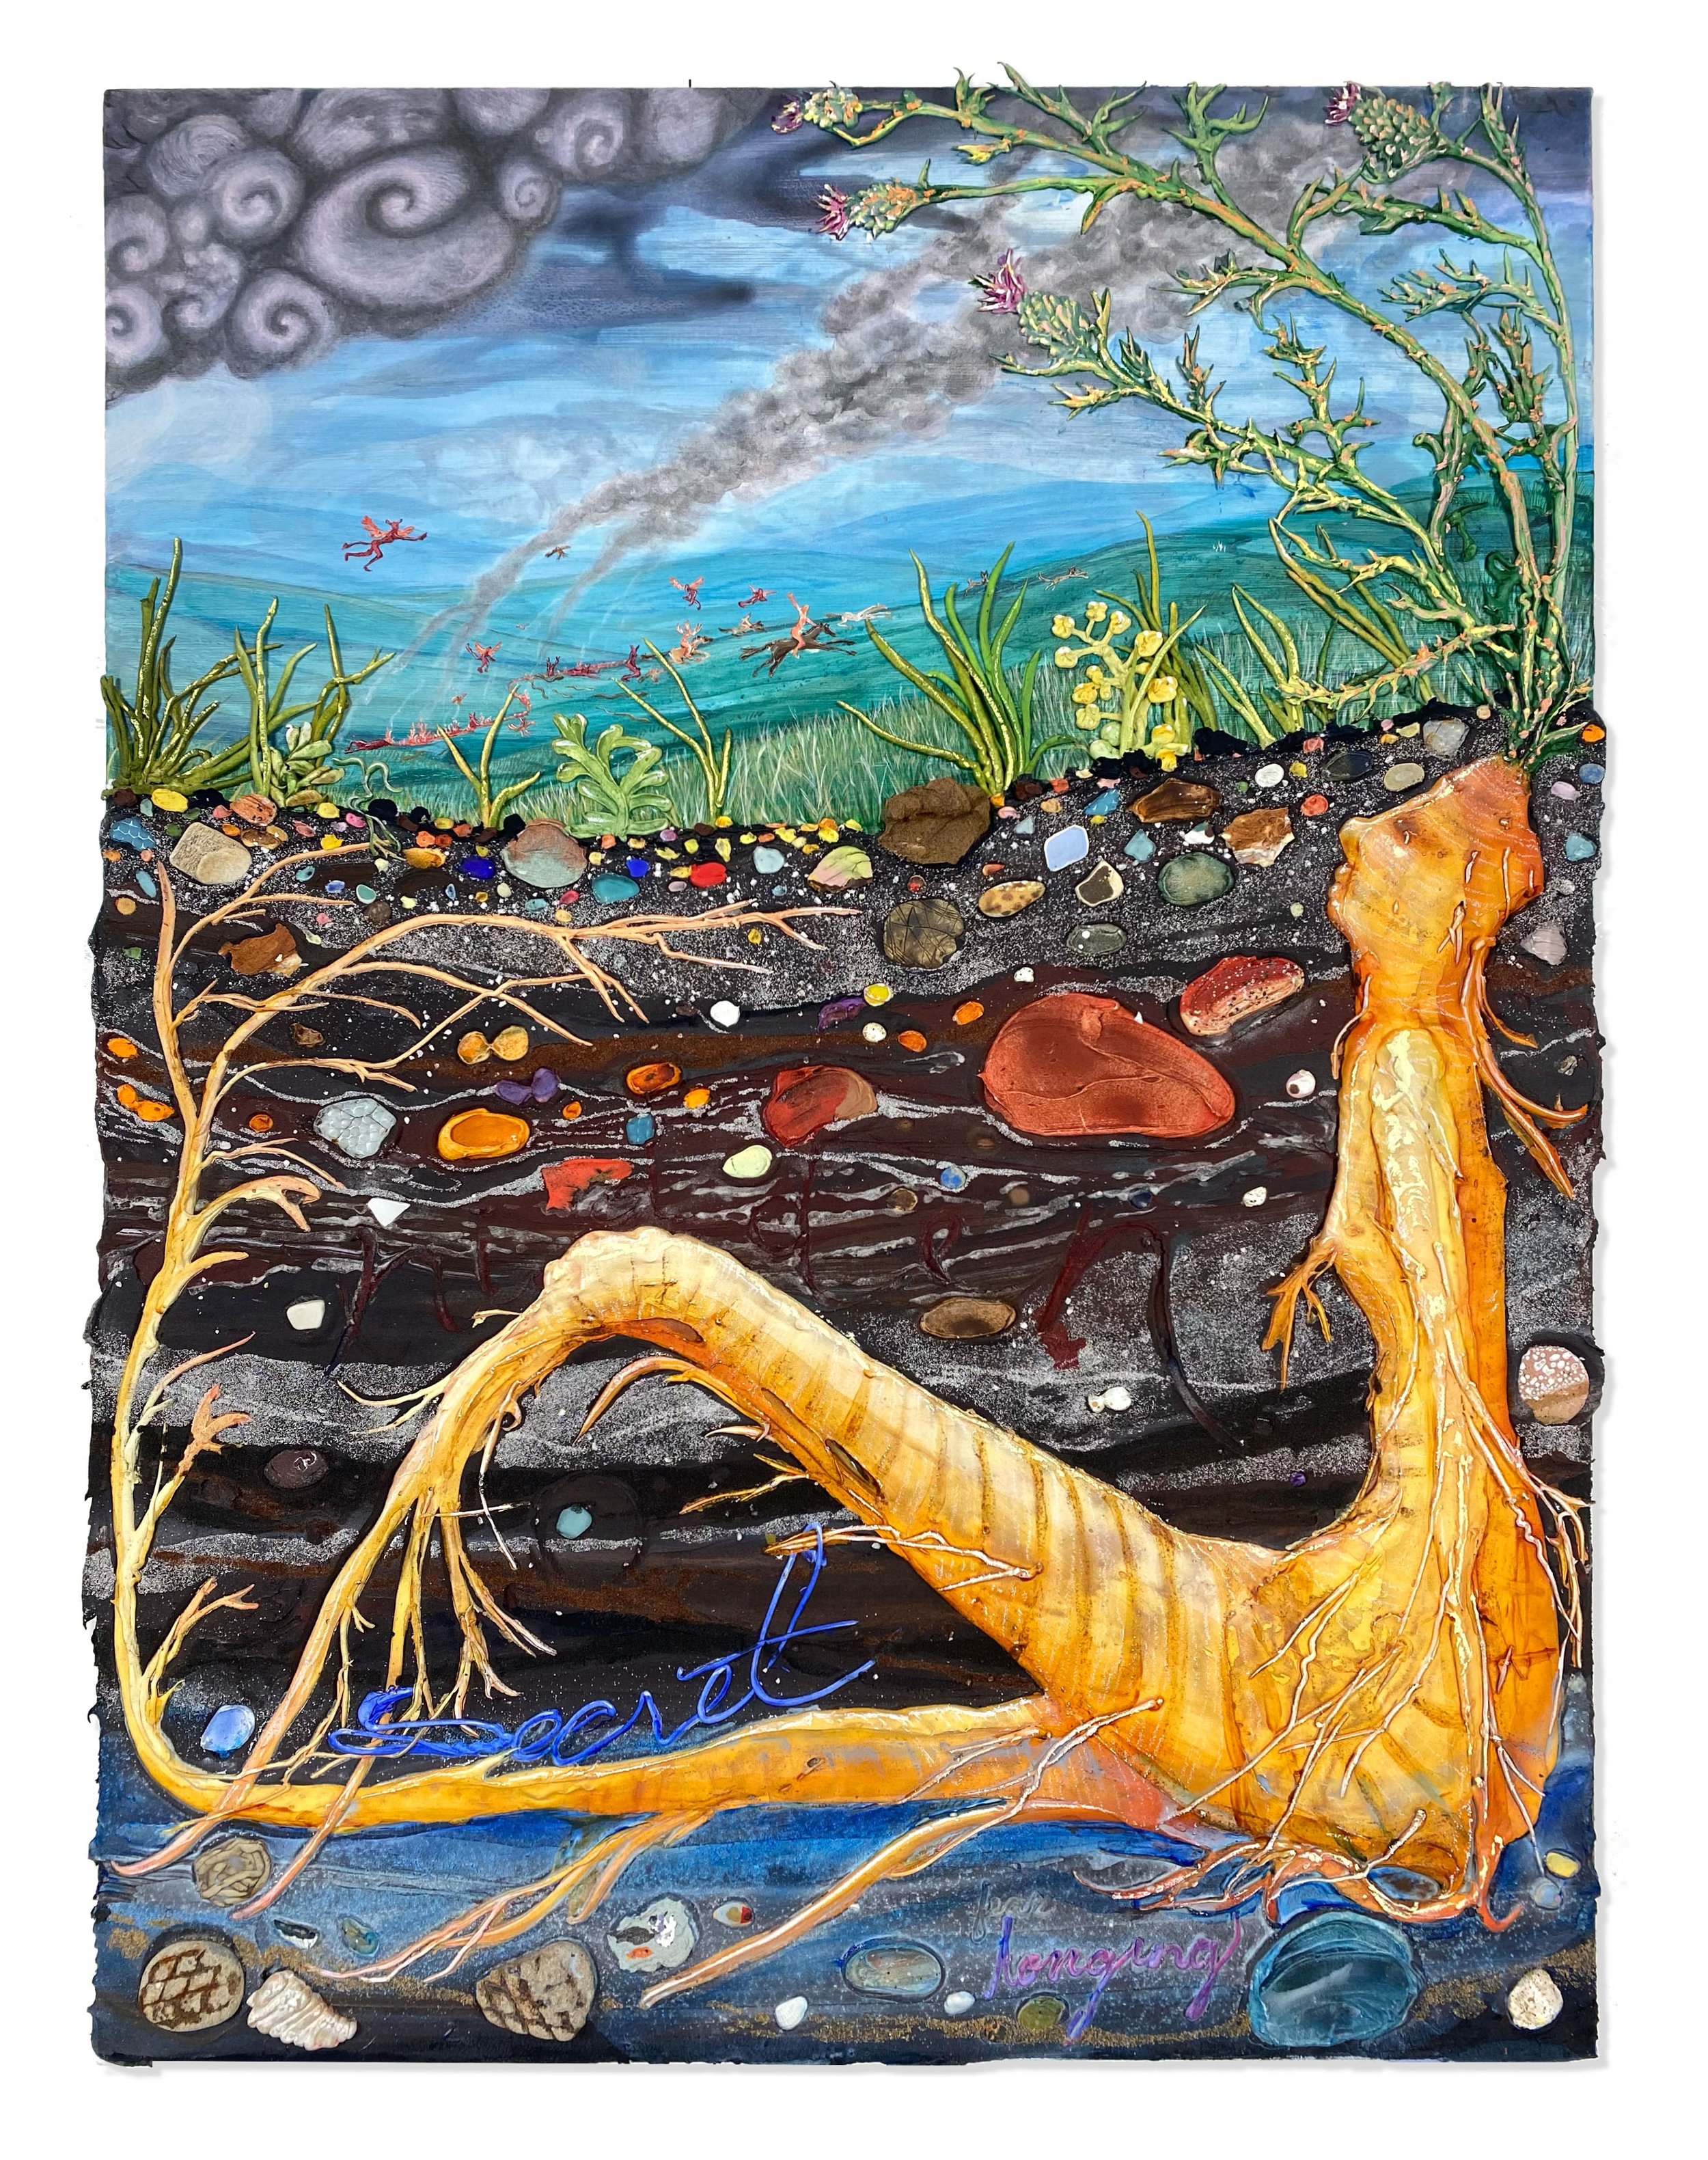   When The Earth Split Open , 2021. Acrylic, pigment, flashe, pumice, sand, ceramic, rocks from Lake Michigan, and oil stick on canvas, 40 x 30.5 x 1.5 in. (101.6 x 77.4 x 3.9 cm)   